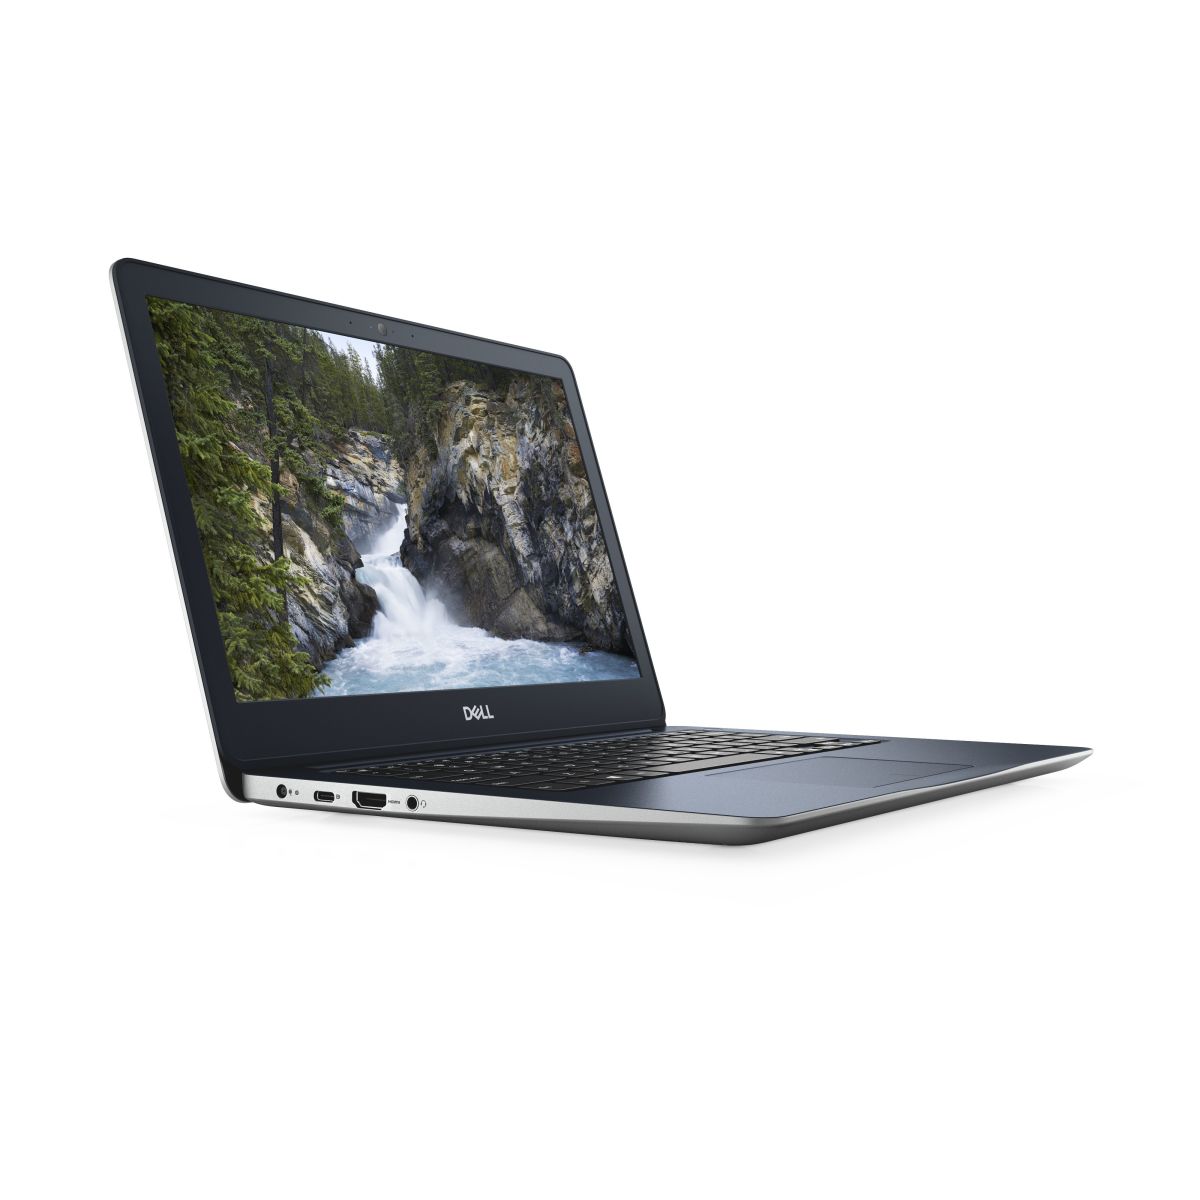 DELL Inspiron 5370 - 9H7C3 laptop specifications